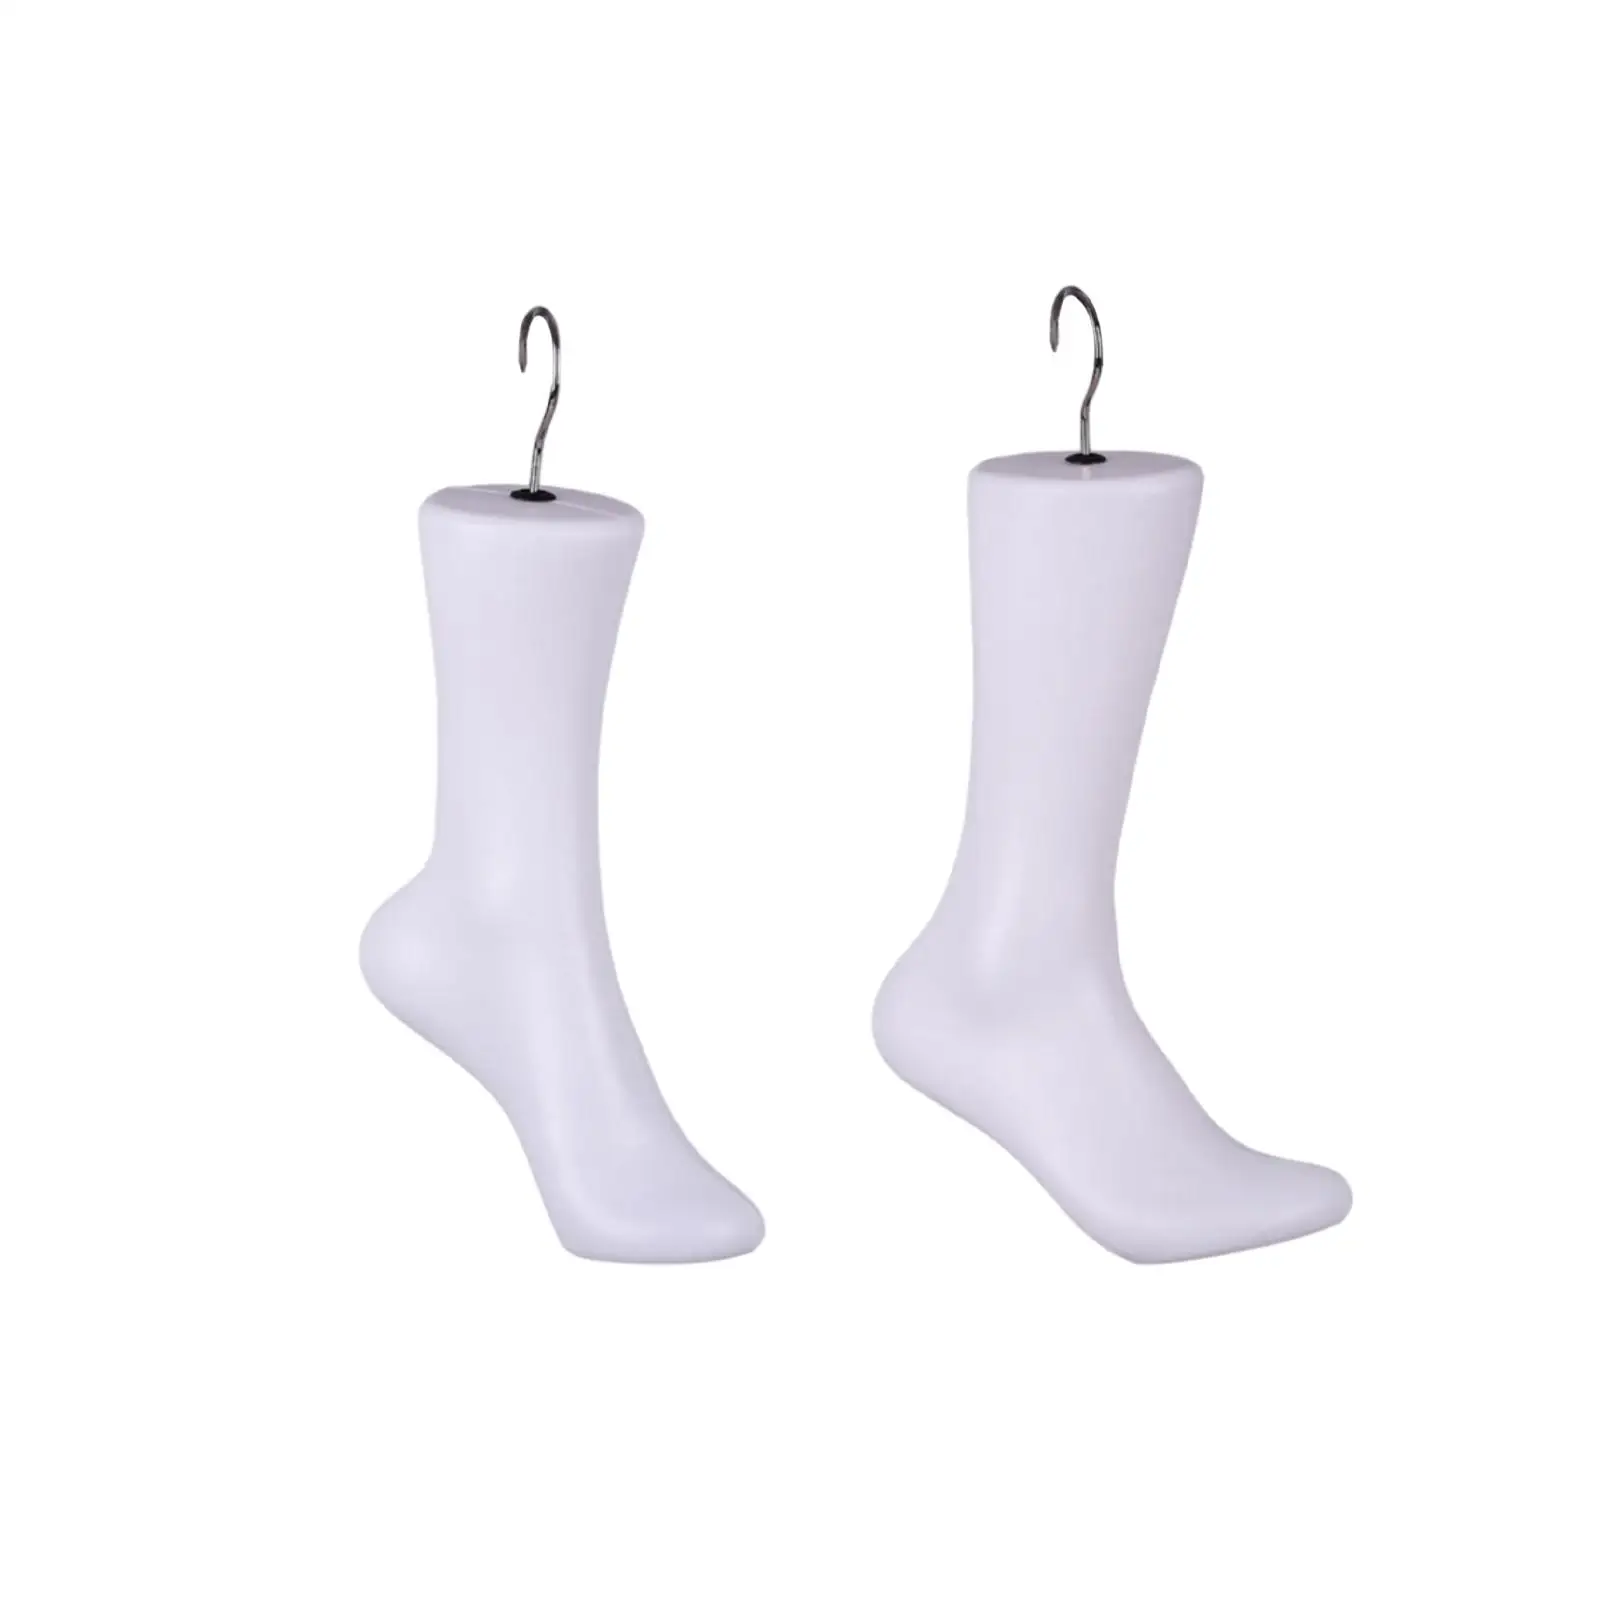 Sock Model Jewelry Display Stand Simulation Foot Model Shoes Displays Model Foot Sock Display Model for Retail Shop Chains Socks